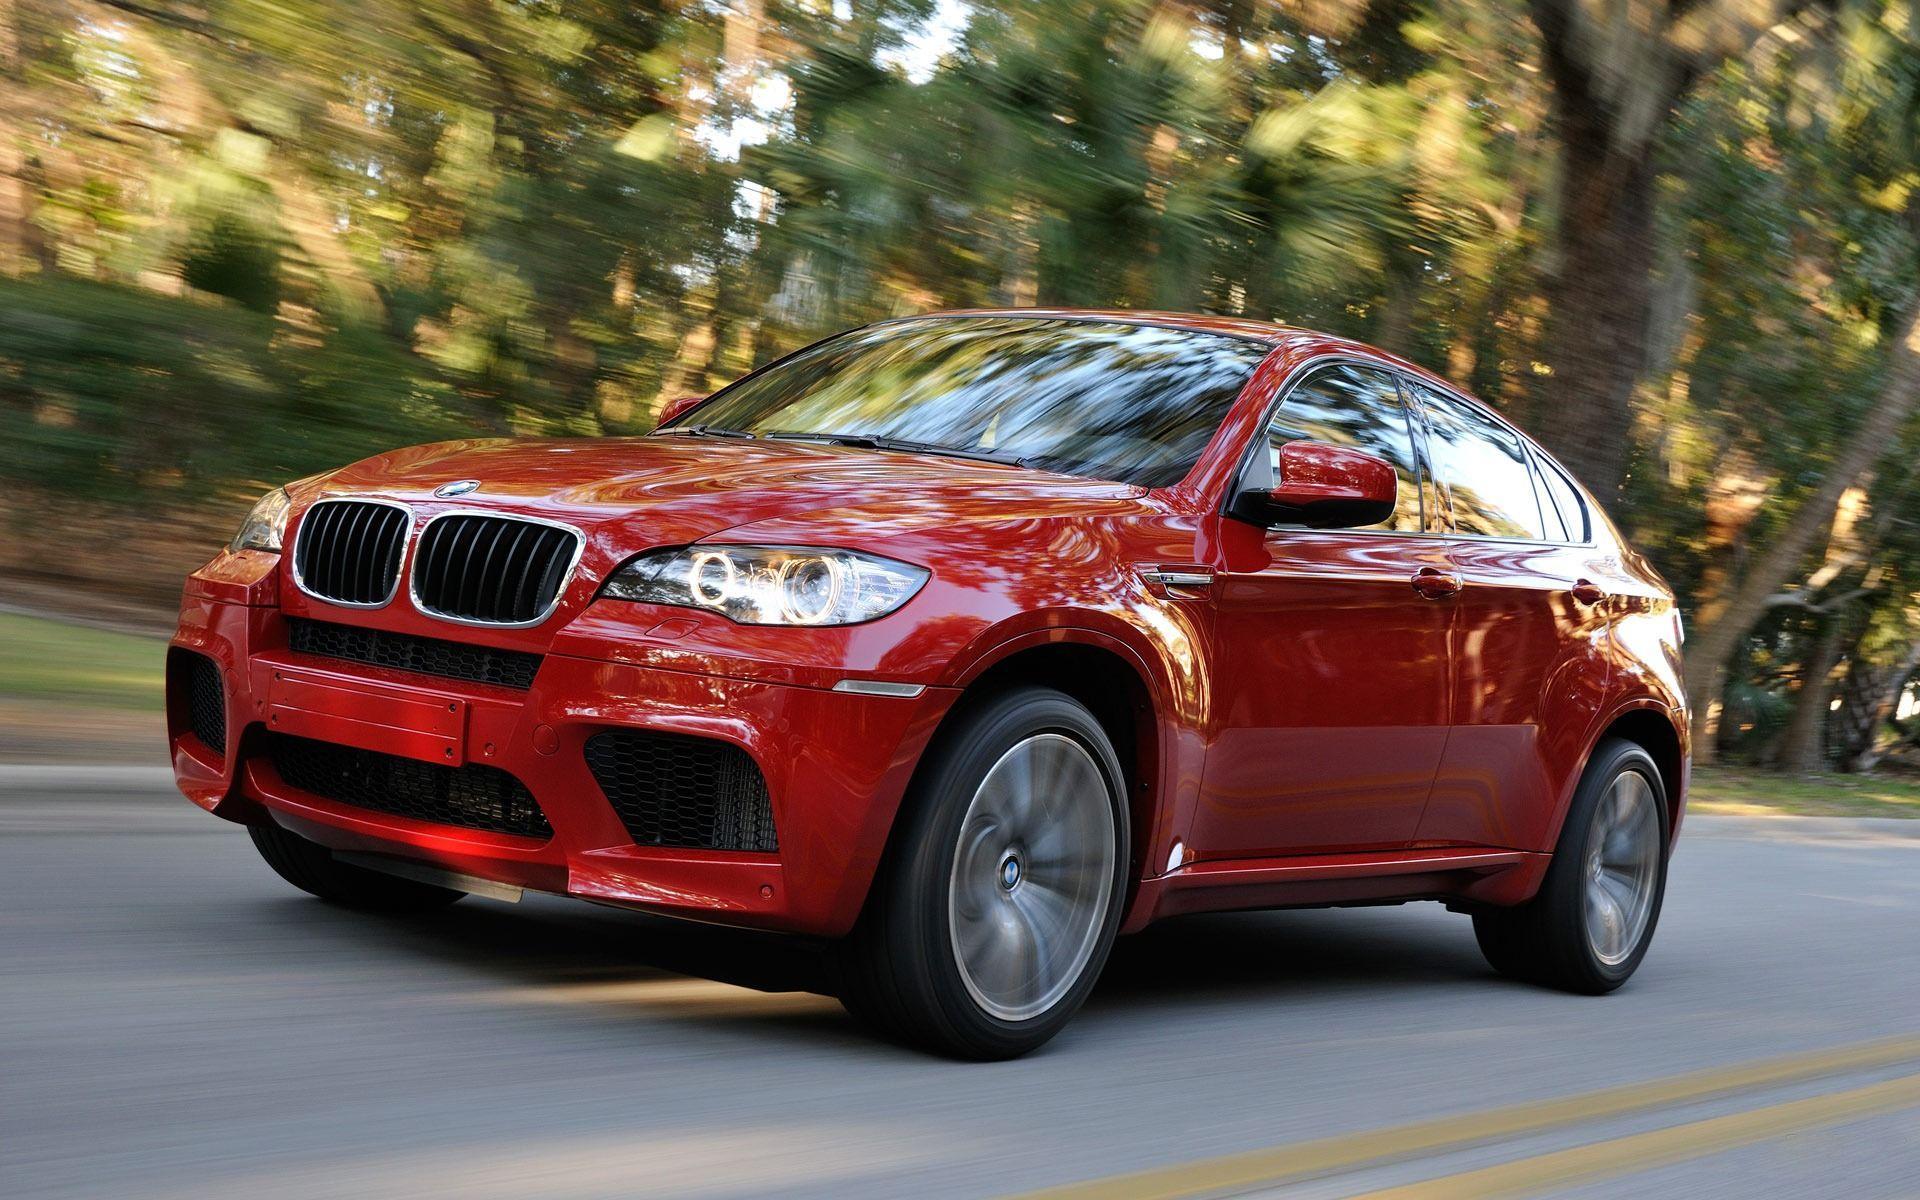 BMW X6 M Wallpaper BMW Cars Wallpaper in jpg format for free download